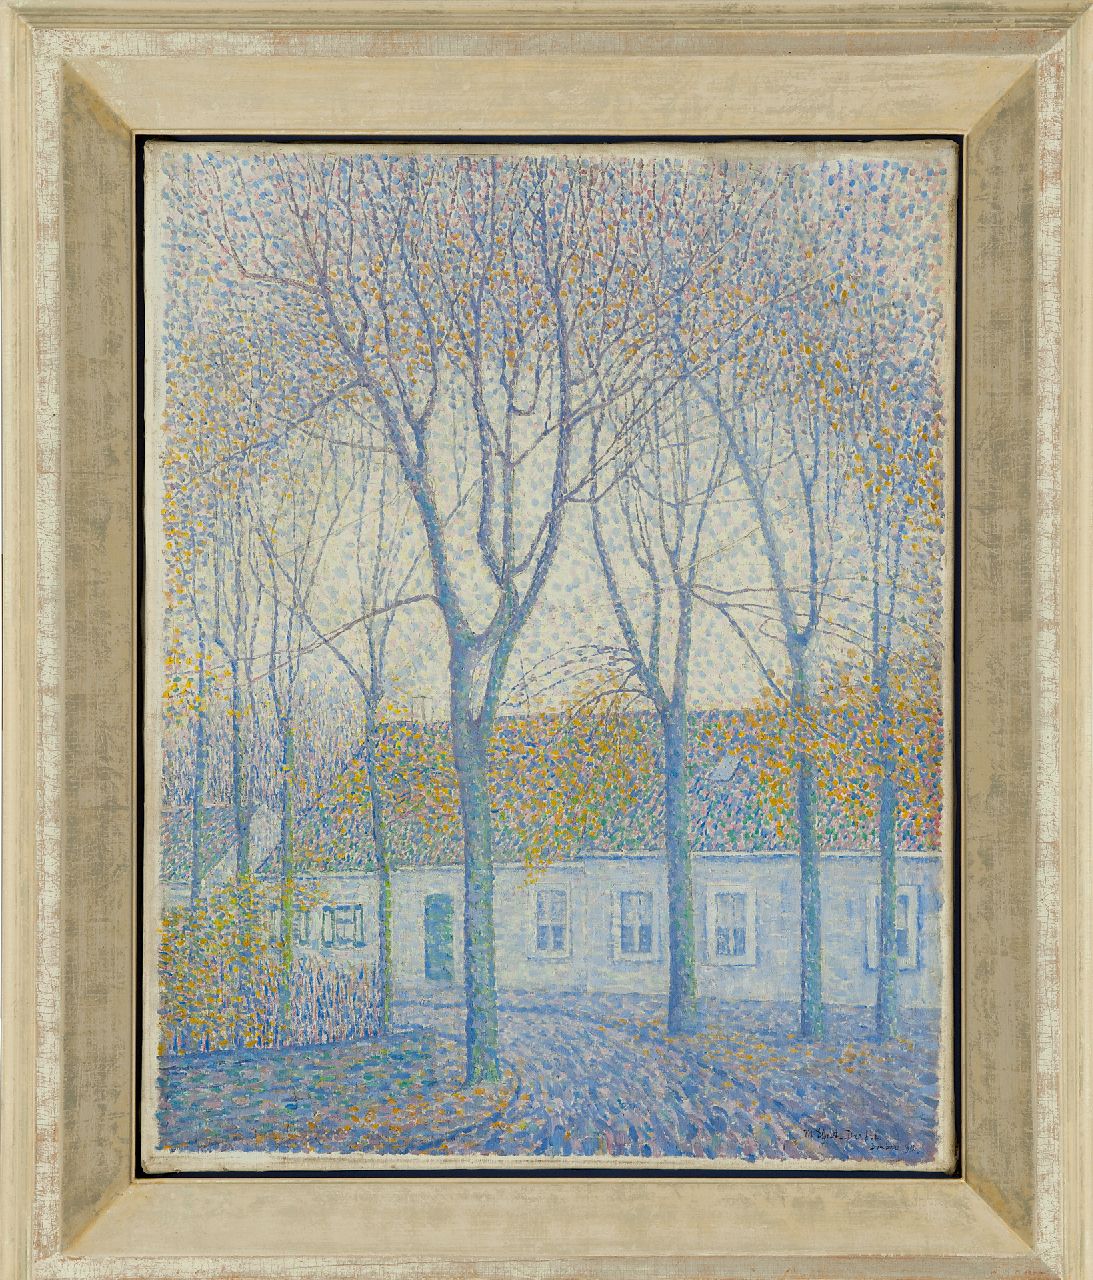 Elout-Drabbe M.J.S.L.  | Marie Jeannette Sophie Lucie 'Mies' Elout-Drabbe, Autumn in Domburg, oil on canvas 69.9 x 54.9 cm, signed l.r. and dated 'Domburg' 1912